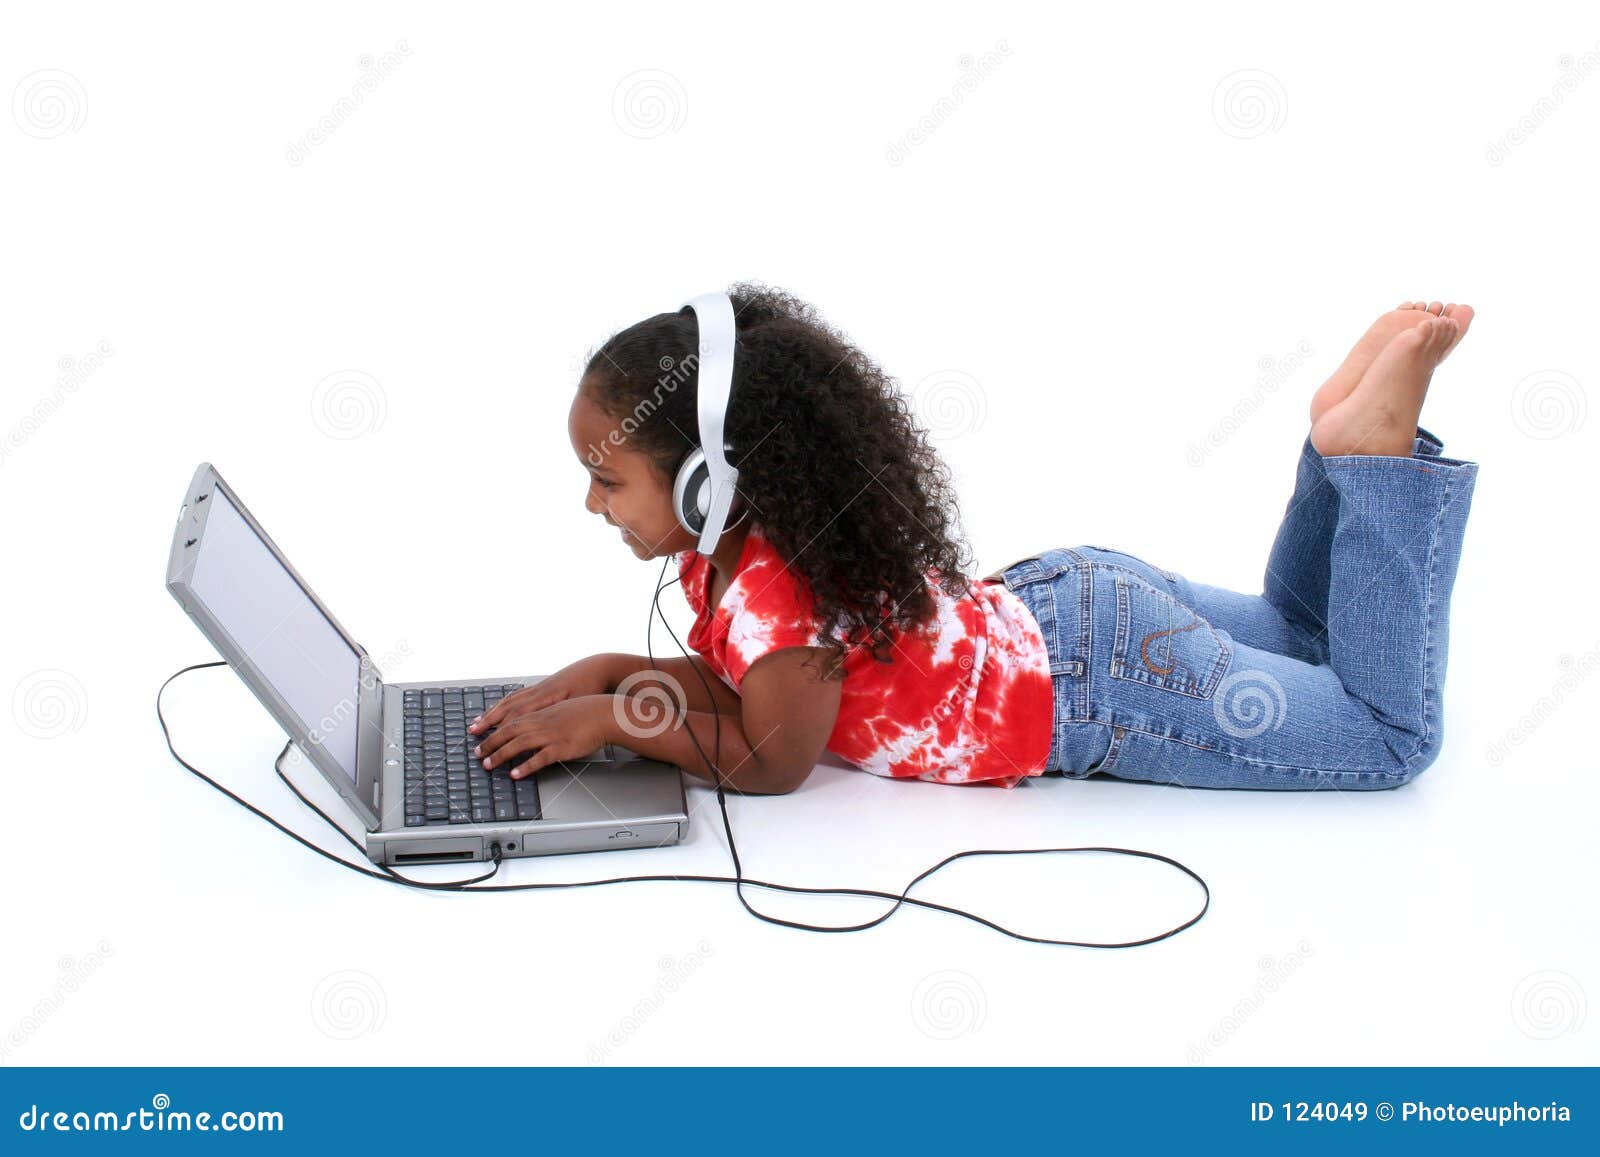 adorable six year old girl sitting on floor with laptop computer